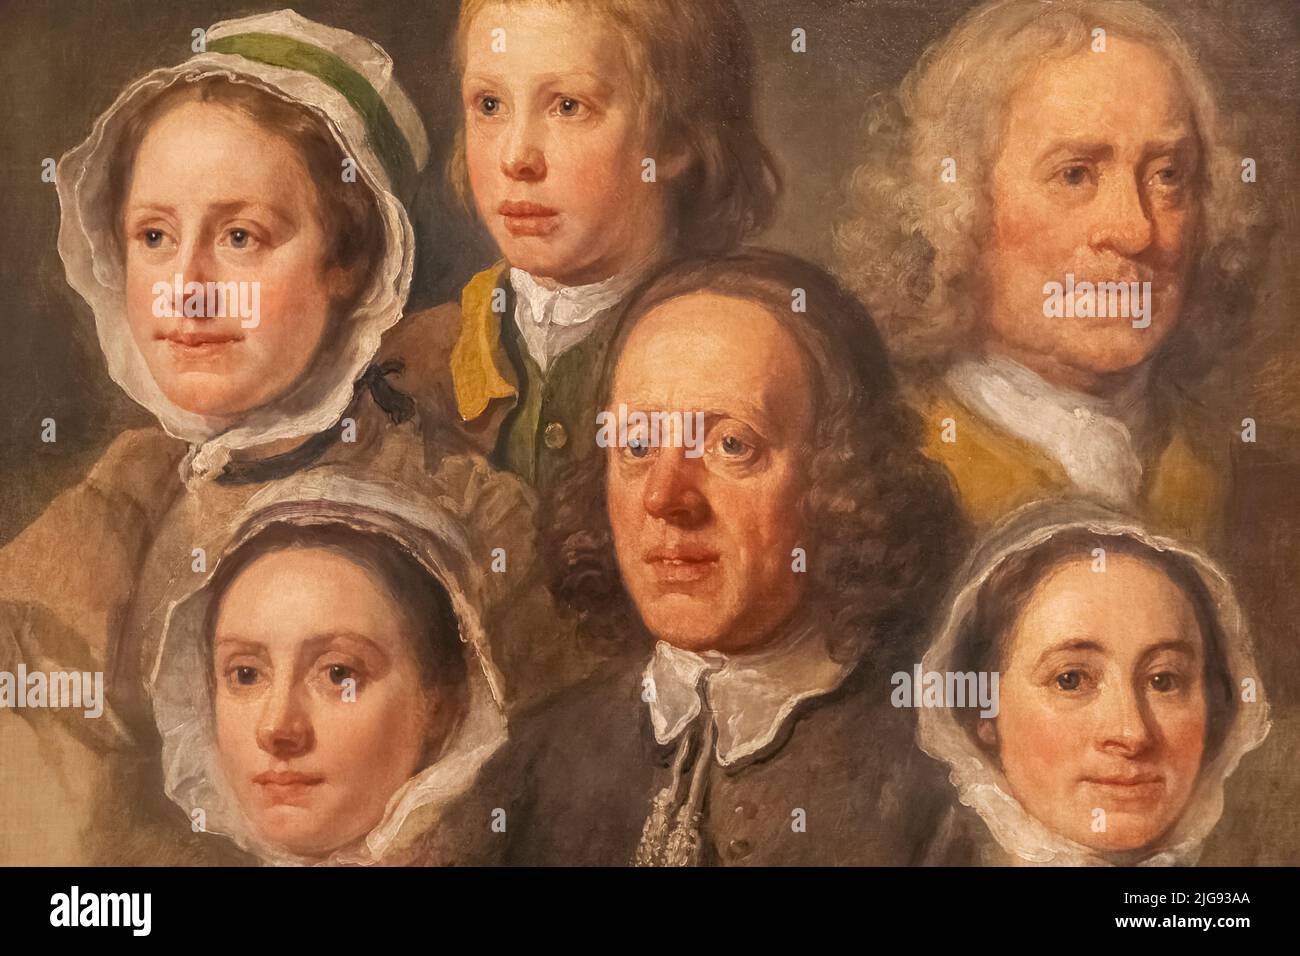 Painting titled 'Heads of Six of Hogarth's Servants' by William Hogarth dated 1750-5 Stock Photo